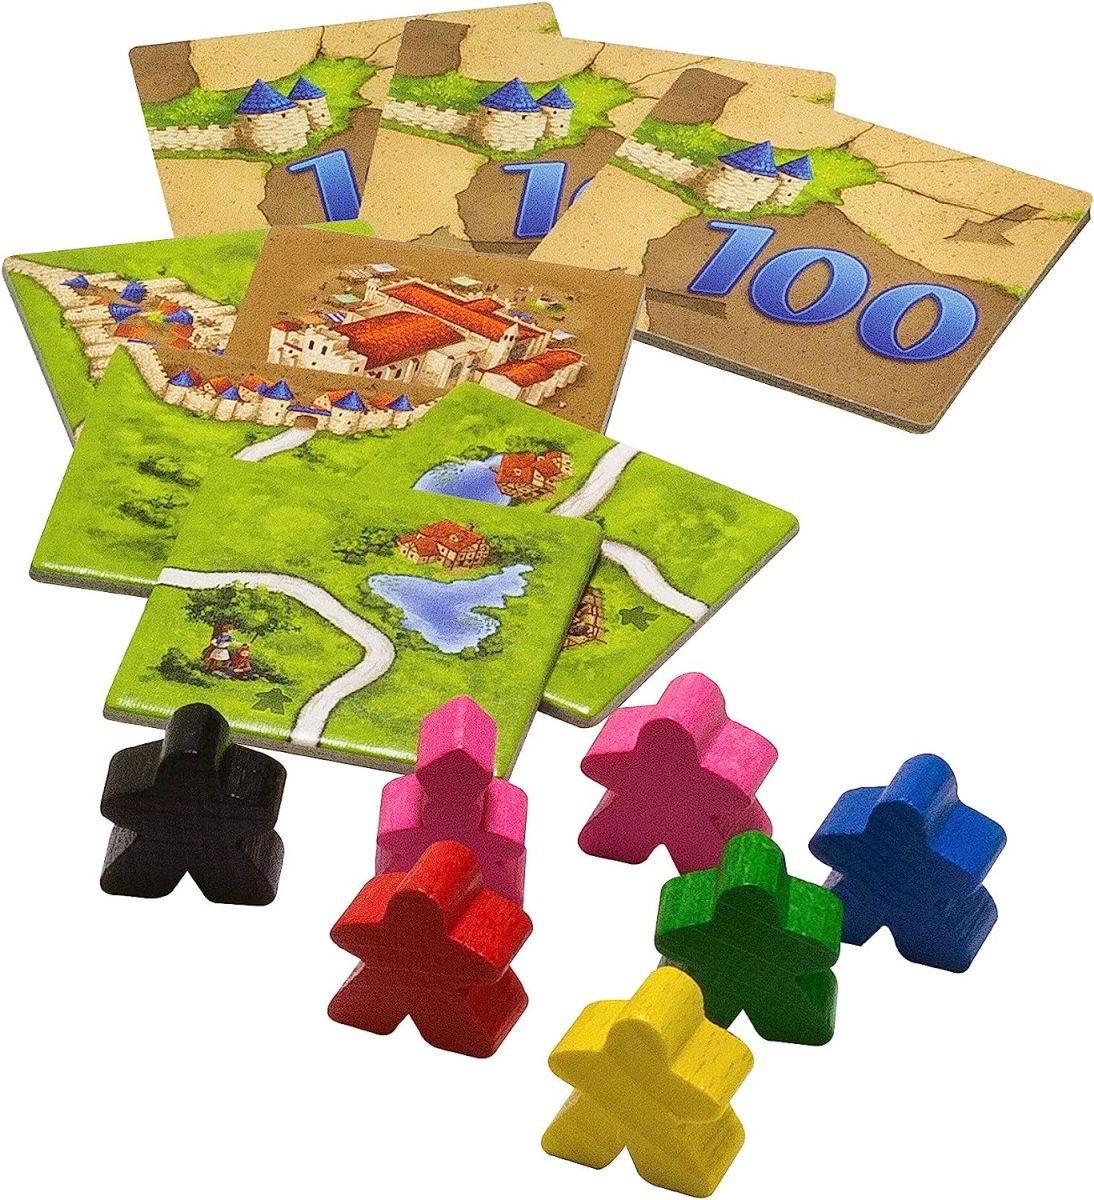 Carcassonne Inns & Cathedrals EXPANSION 1 | Board Game for Adults and Family | Strategy,Medieval Adventure Board Game | 2-6 Players | Made by Z-Man Games